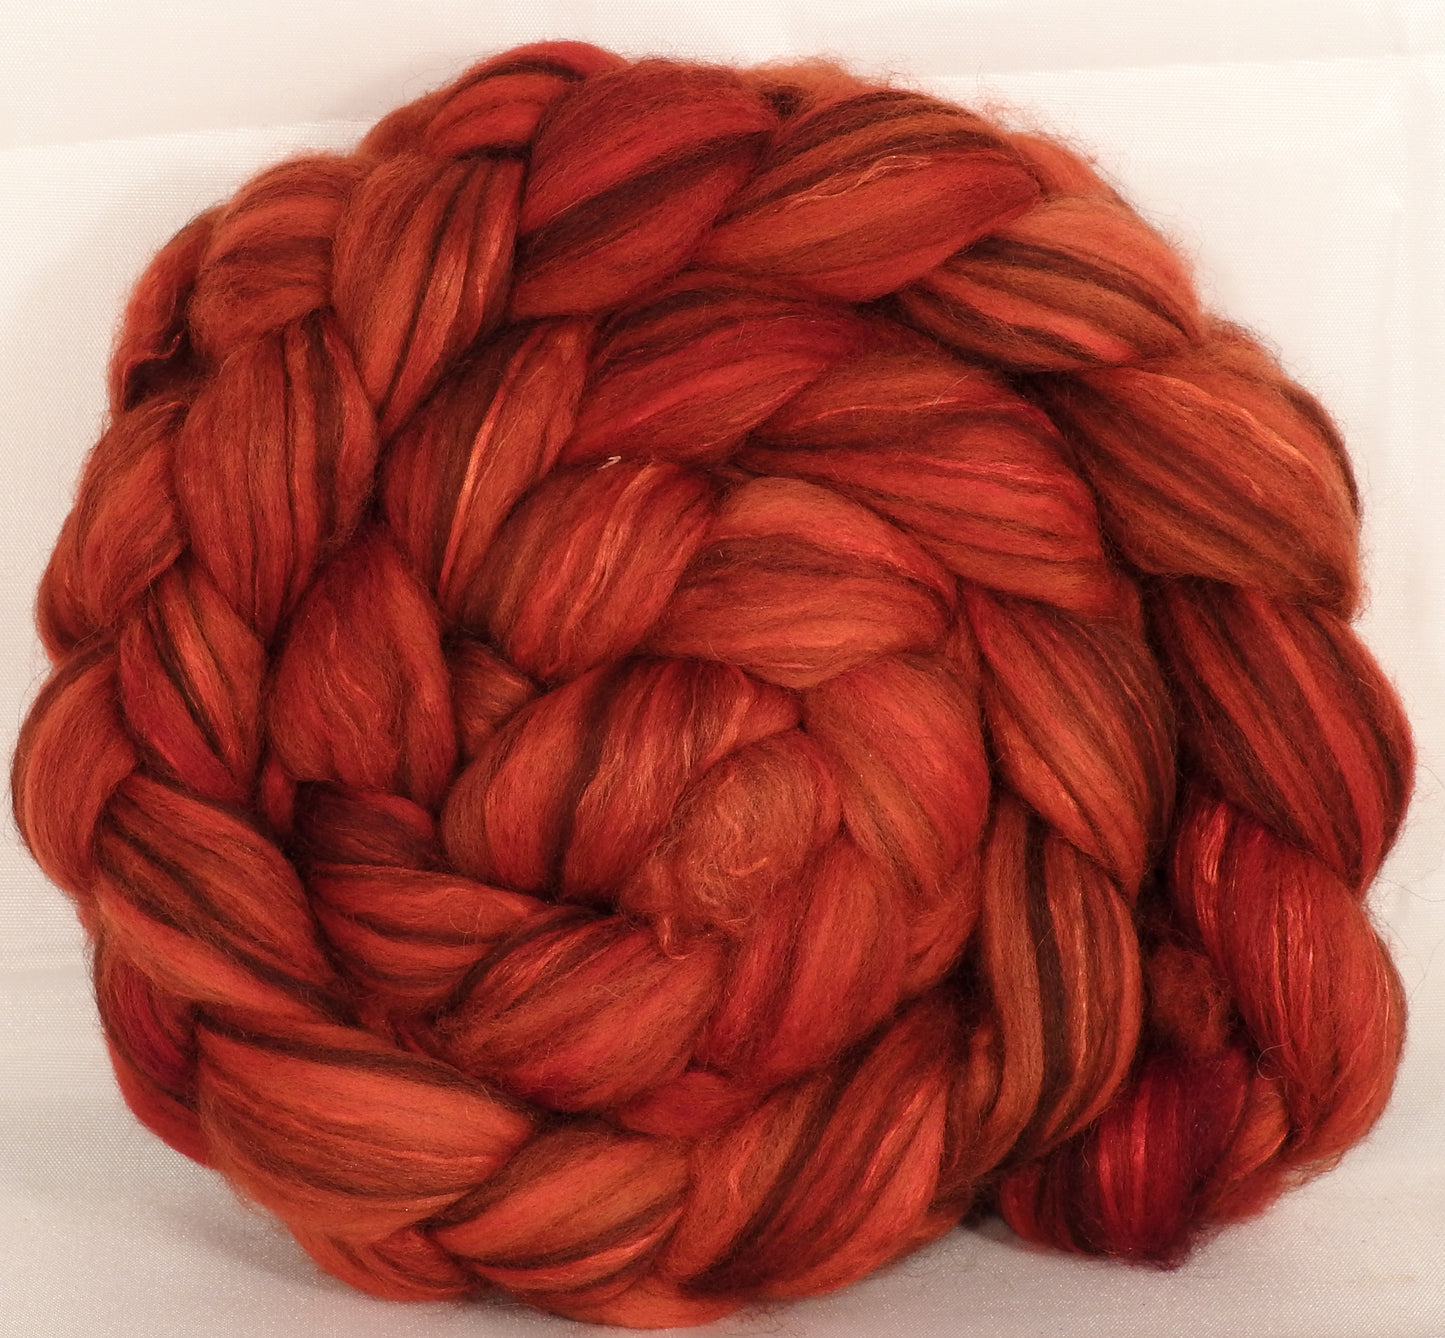 Hand dyed top for spinning - Holly Berry - (5.2 oz.) 18.5 mic merino/ camel/ brown alpaca/ mulberry silk/ (40/20/20/20) - Inglenook Fibers